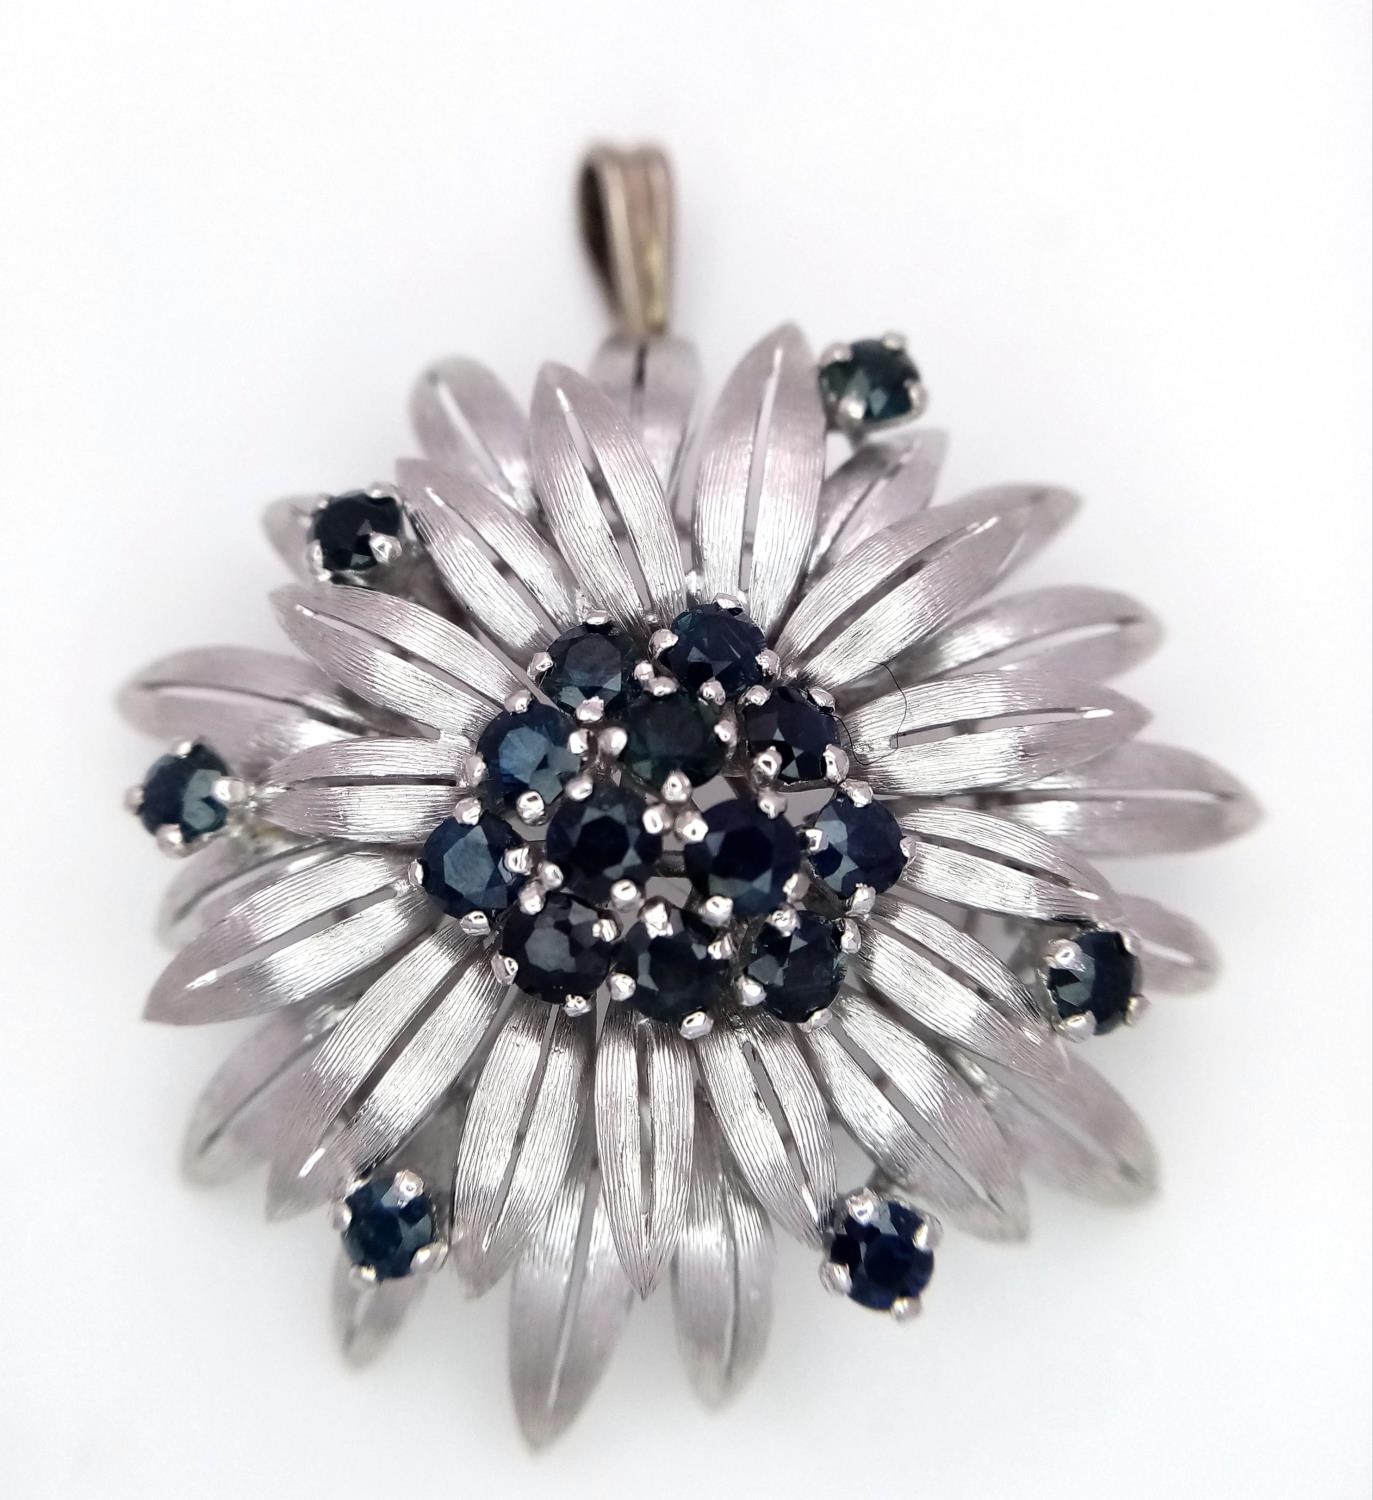 A 14ct white gold (tested as) sapphire flower brooch that has a bail that can be worn as a